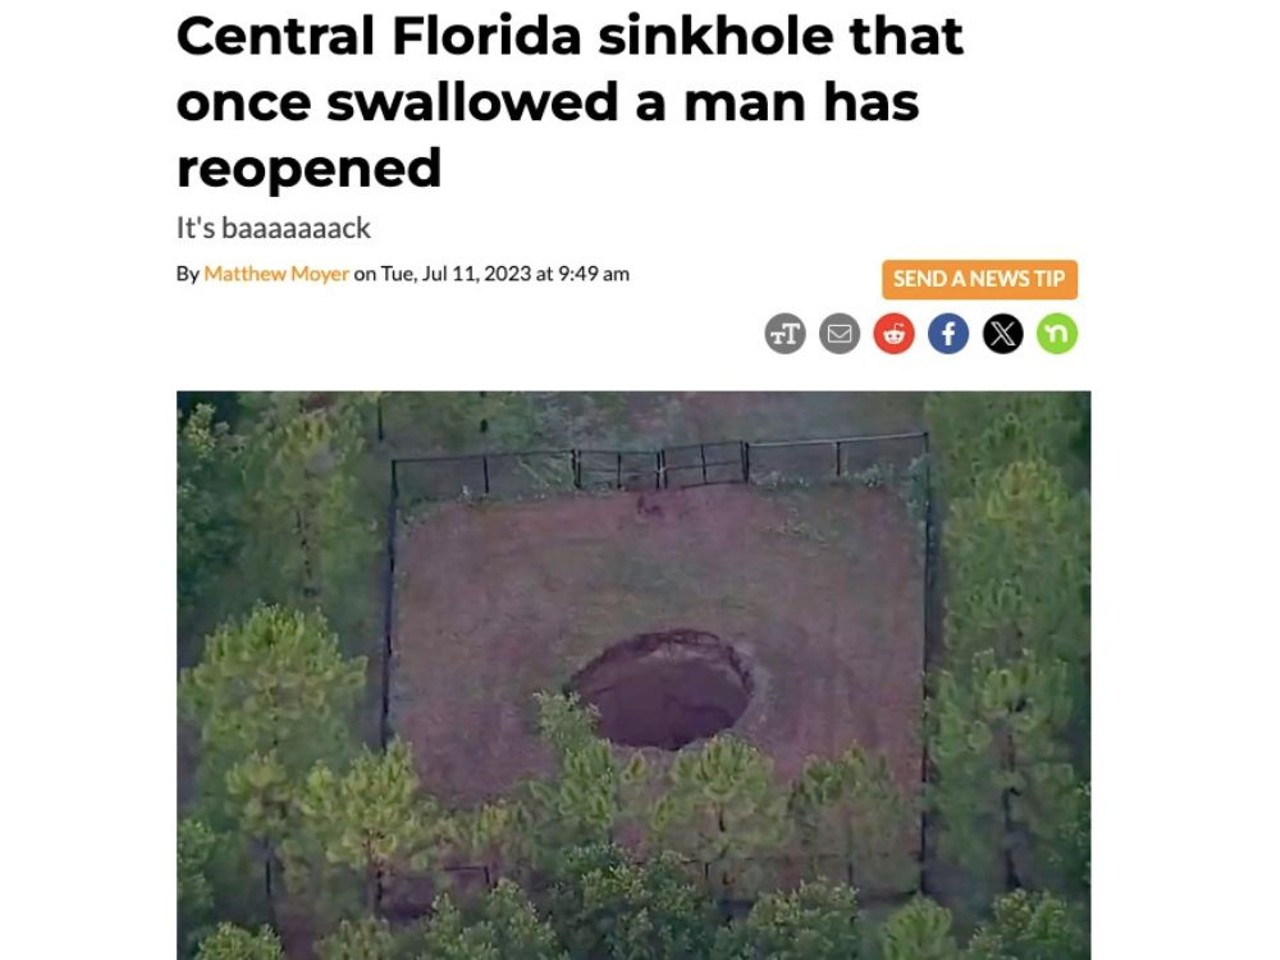 This is the third incident involving this infamous sinkhole. Back in 2013, the sinkhole swallowed 37-year-old Jeff Bush while he was asleep in his house. His body was never recovered. Read full article